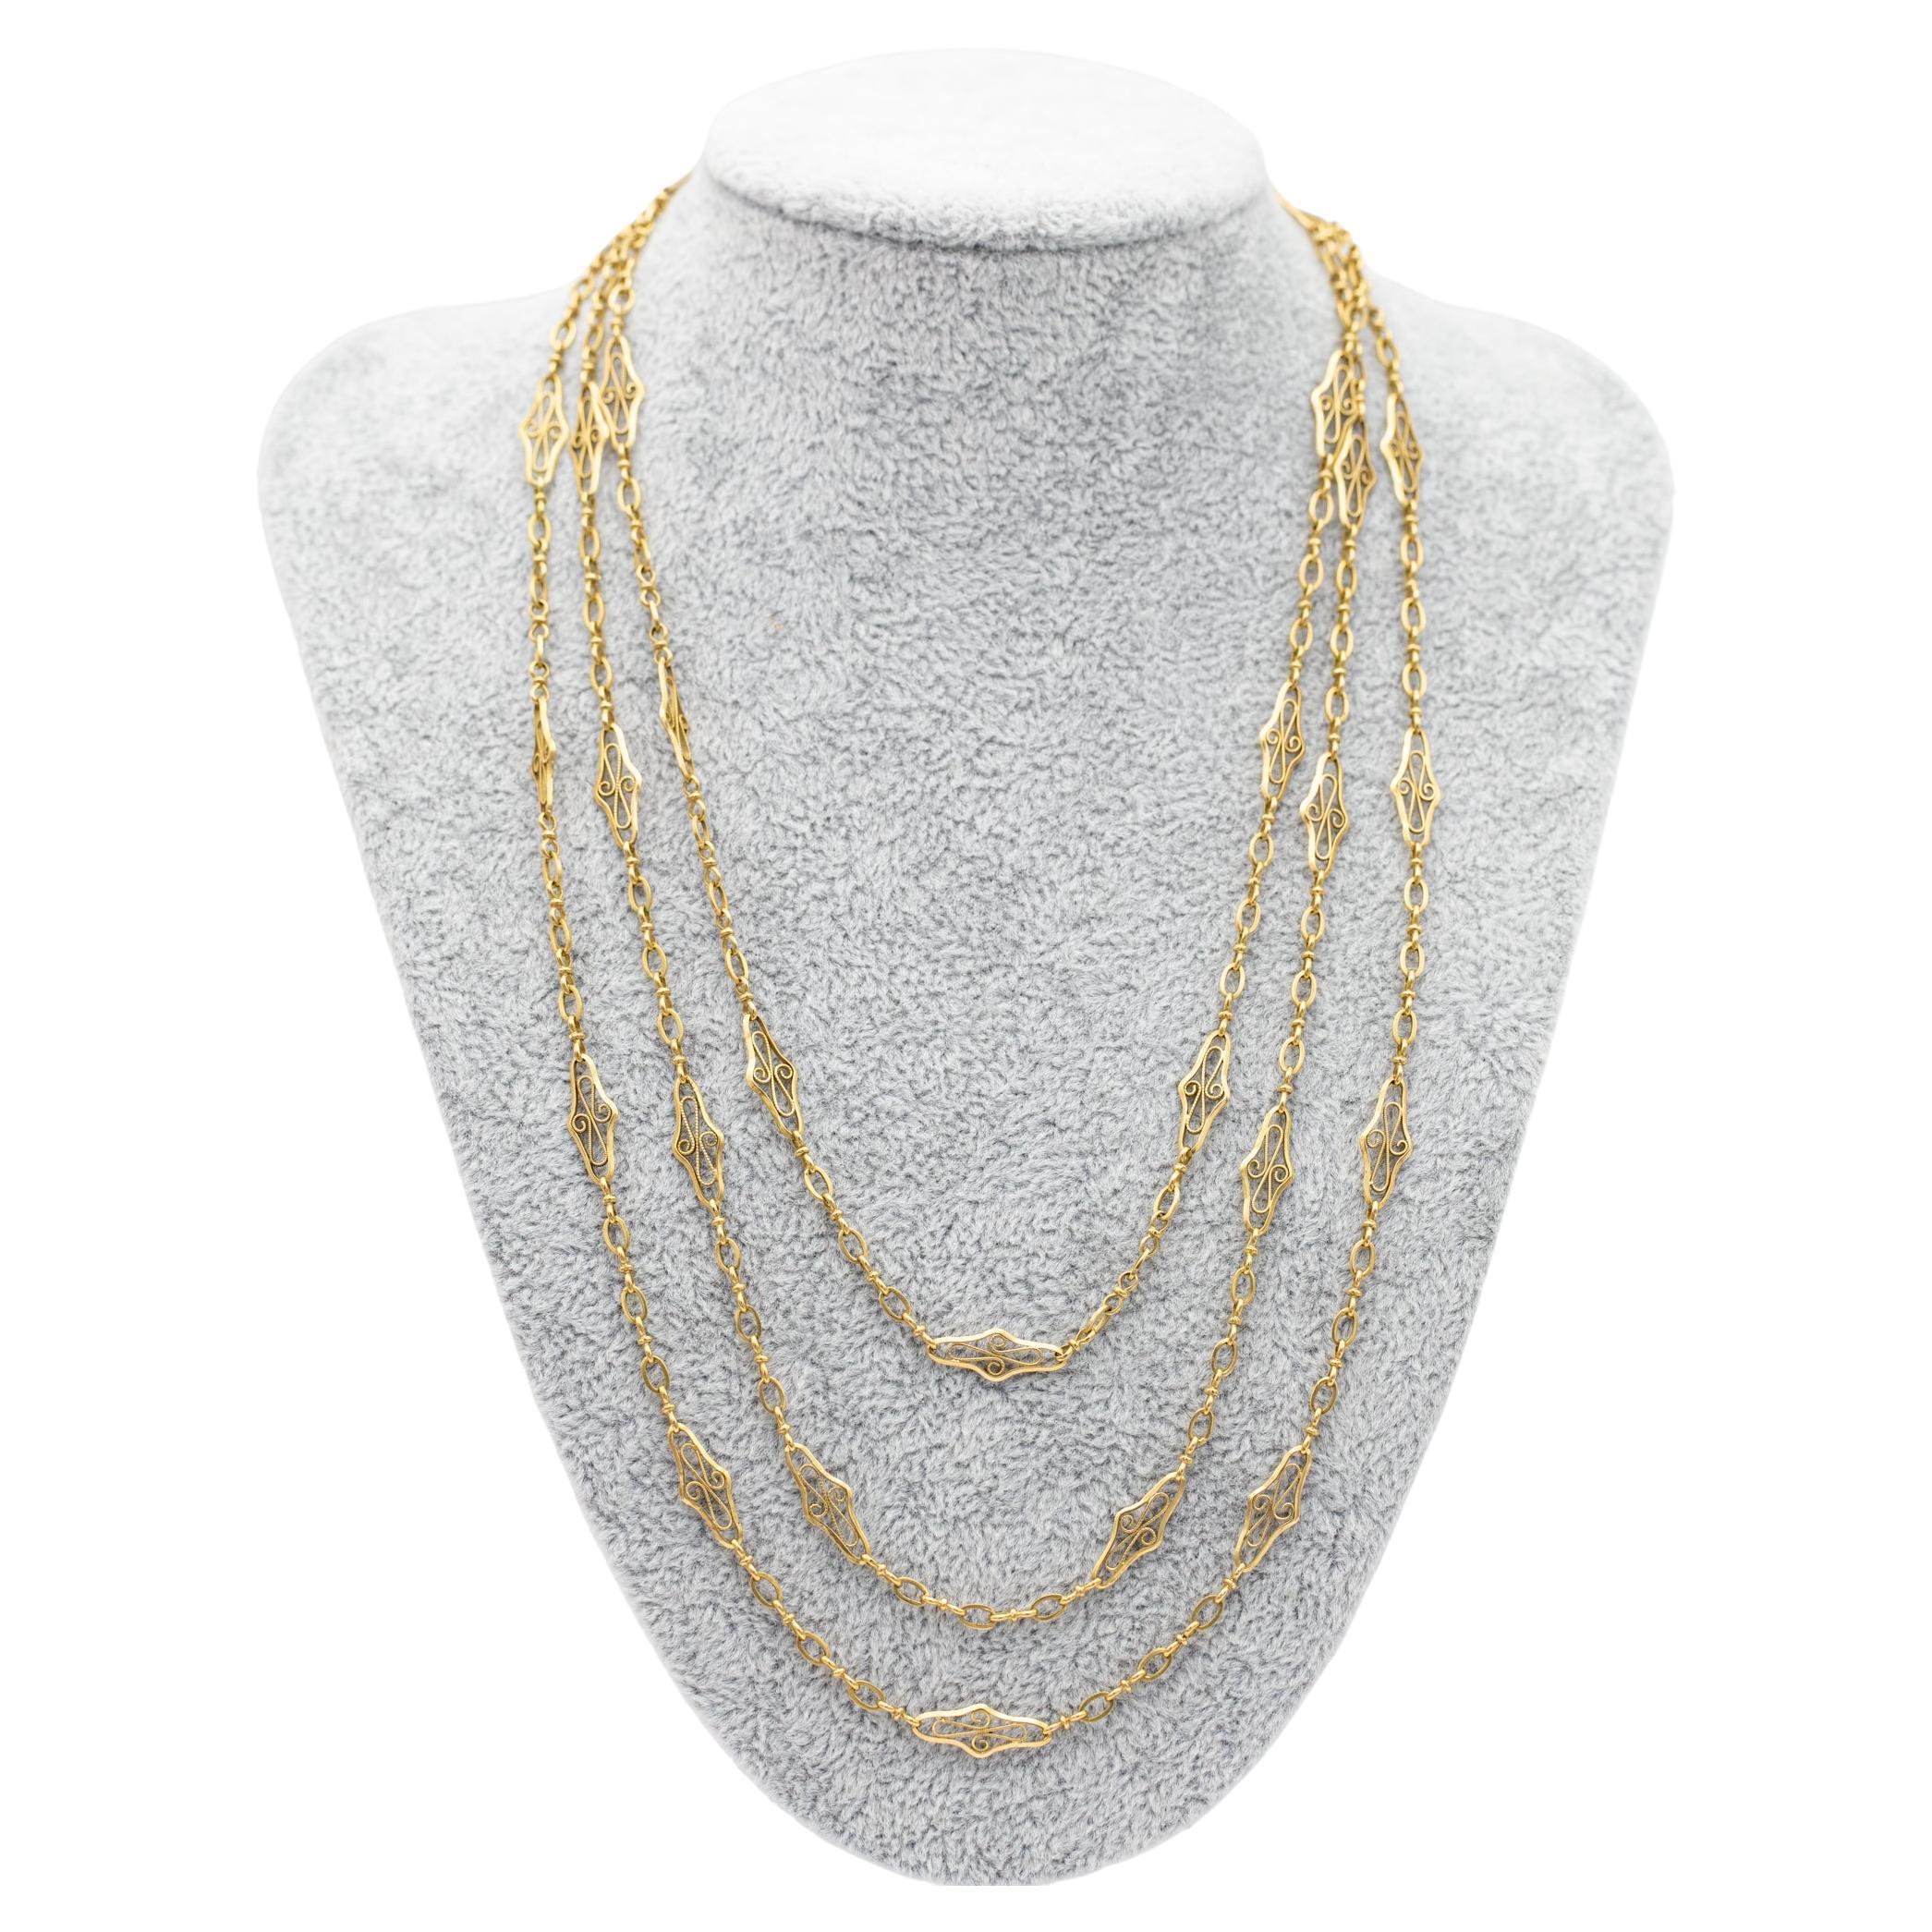 For sale is this lovely 18 K yellow gold sautoir necklace that can be worn as a single, double or triple stand. This elegant necklace consists out alternating simpler and fancy looking links with lovely filigree scroll decorations and millegrain